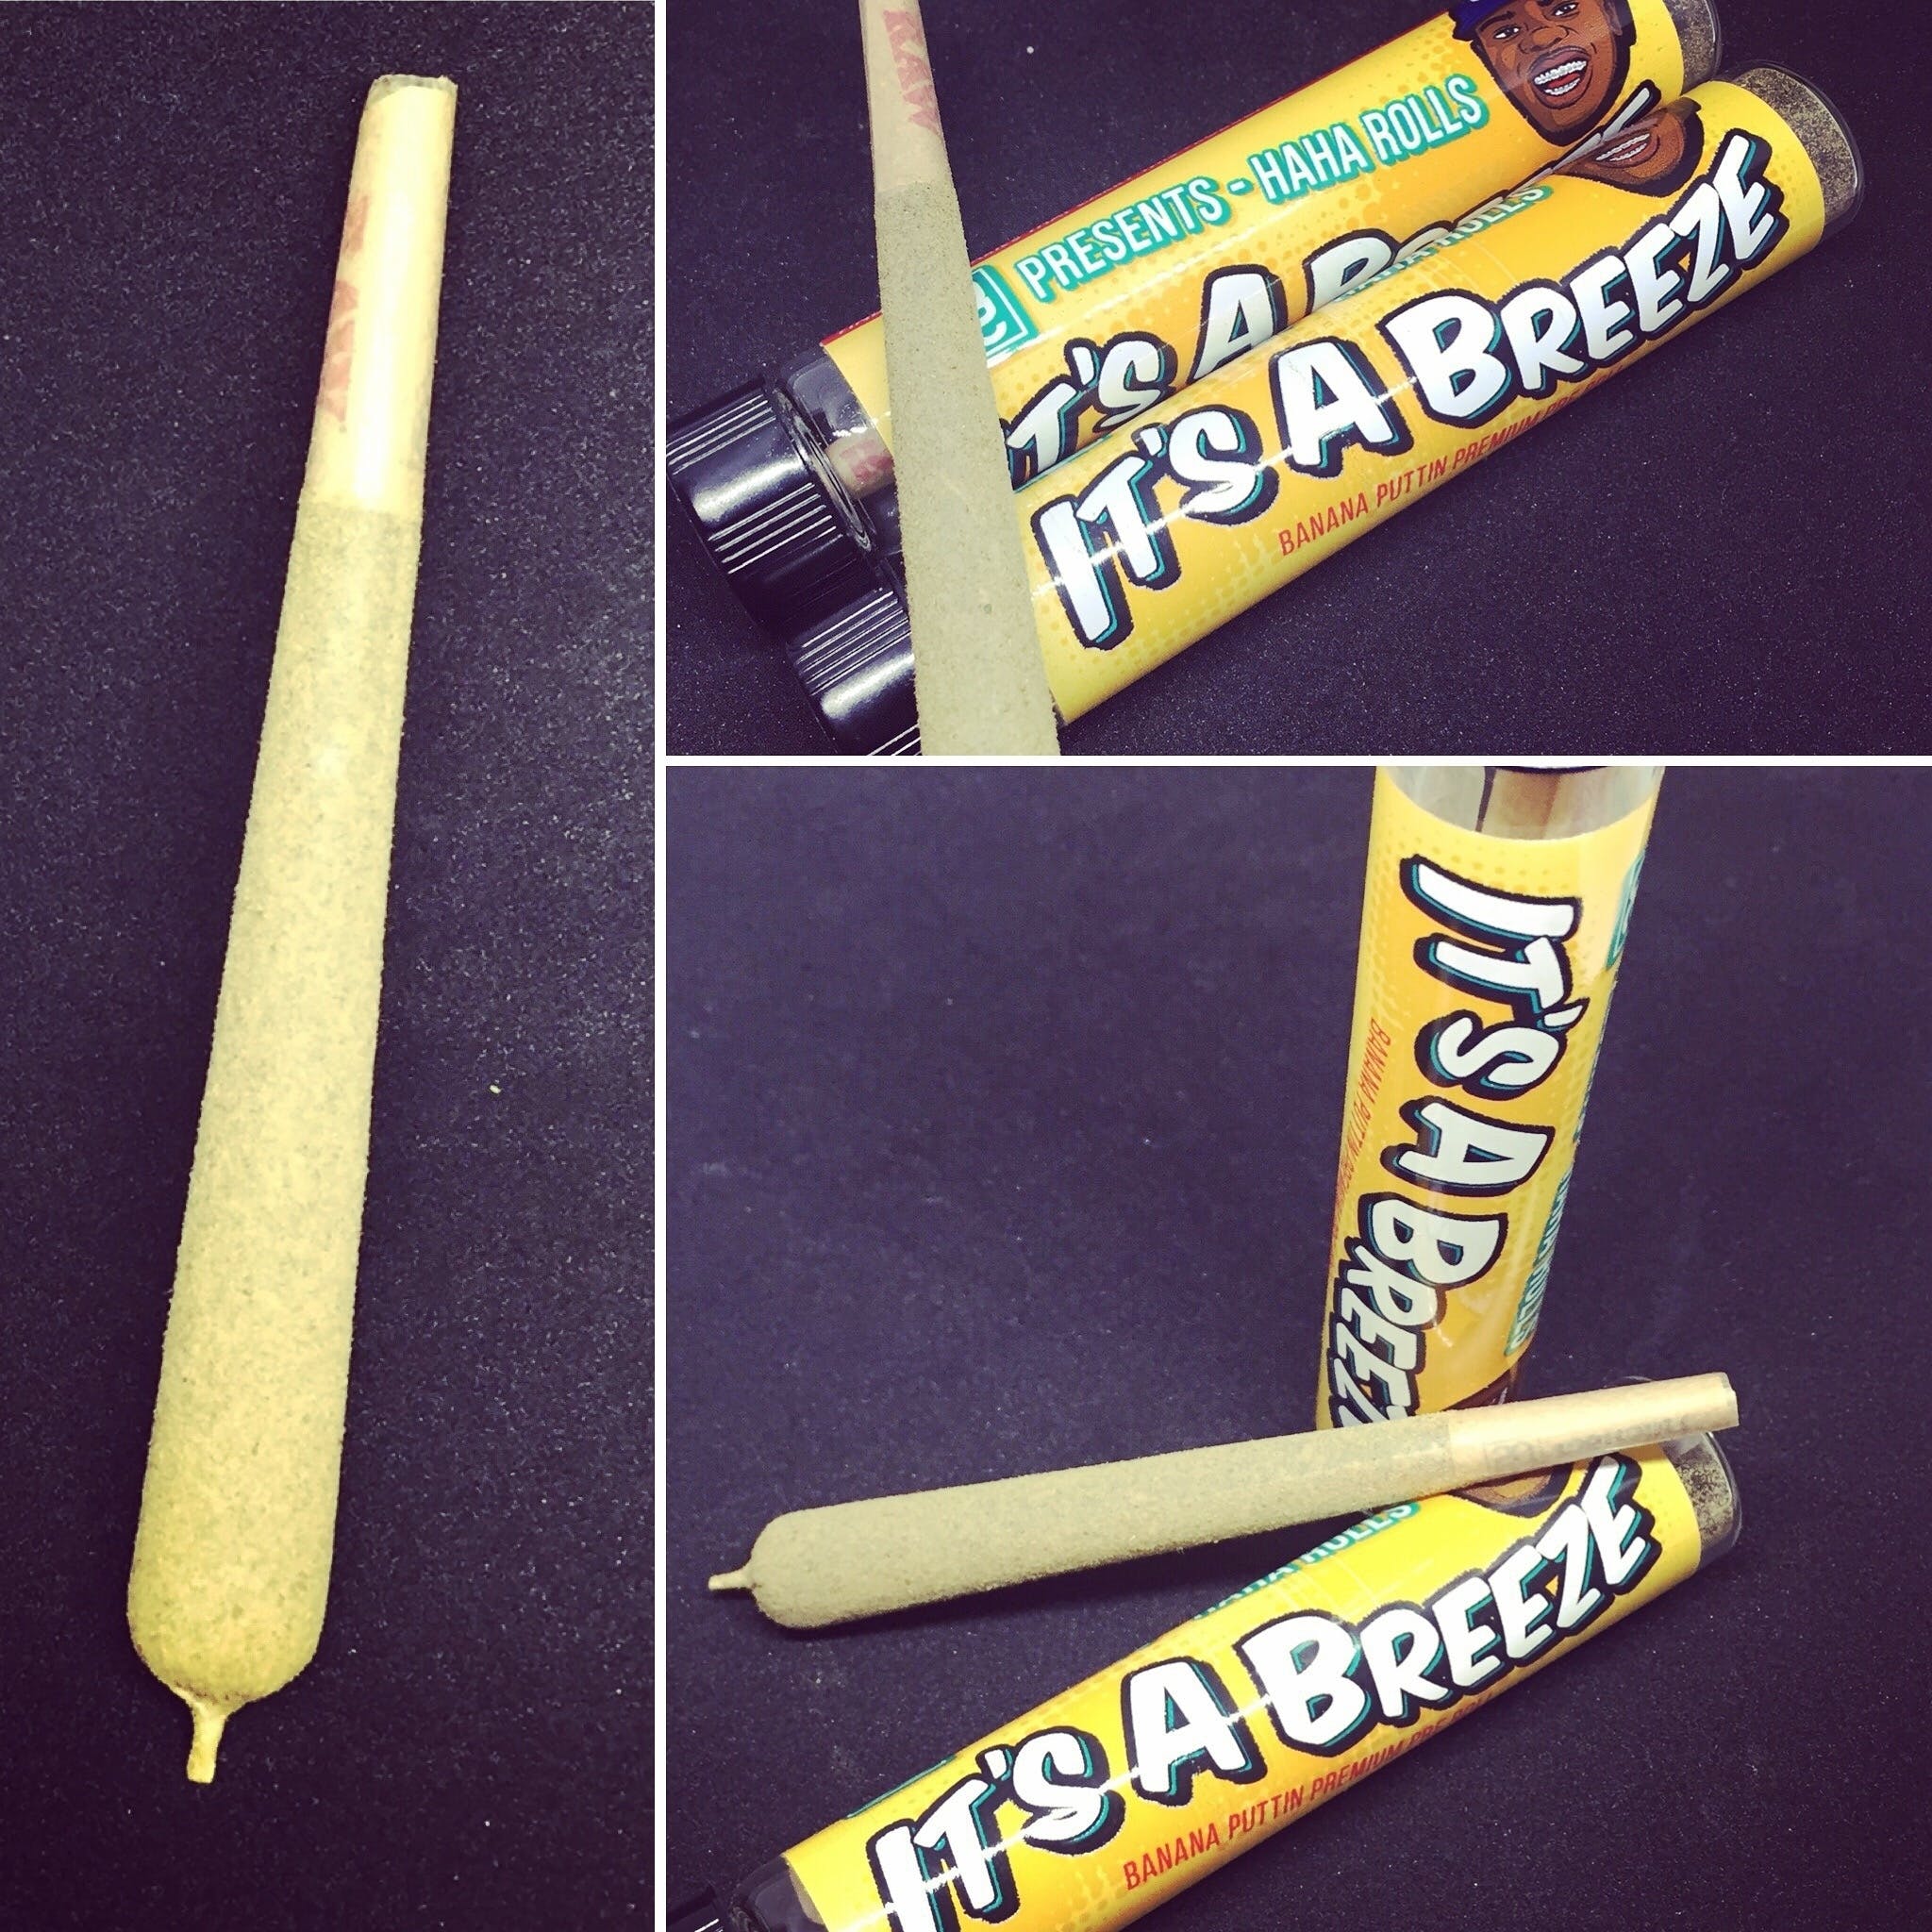 Premium Pre-Roll (Banana) Wrapped in Golden Keef & HaHa Rolls